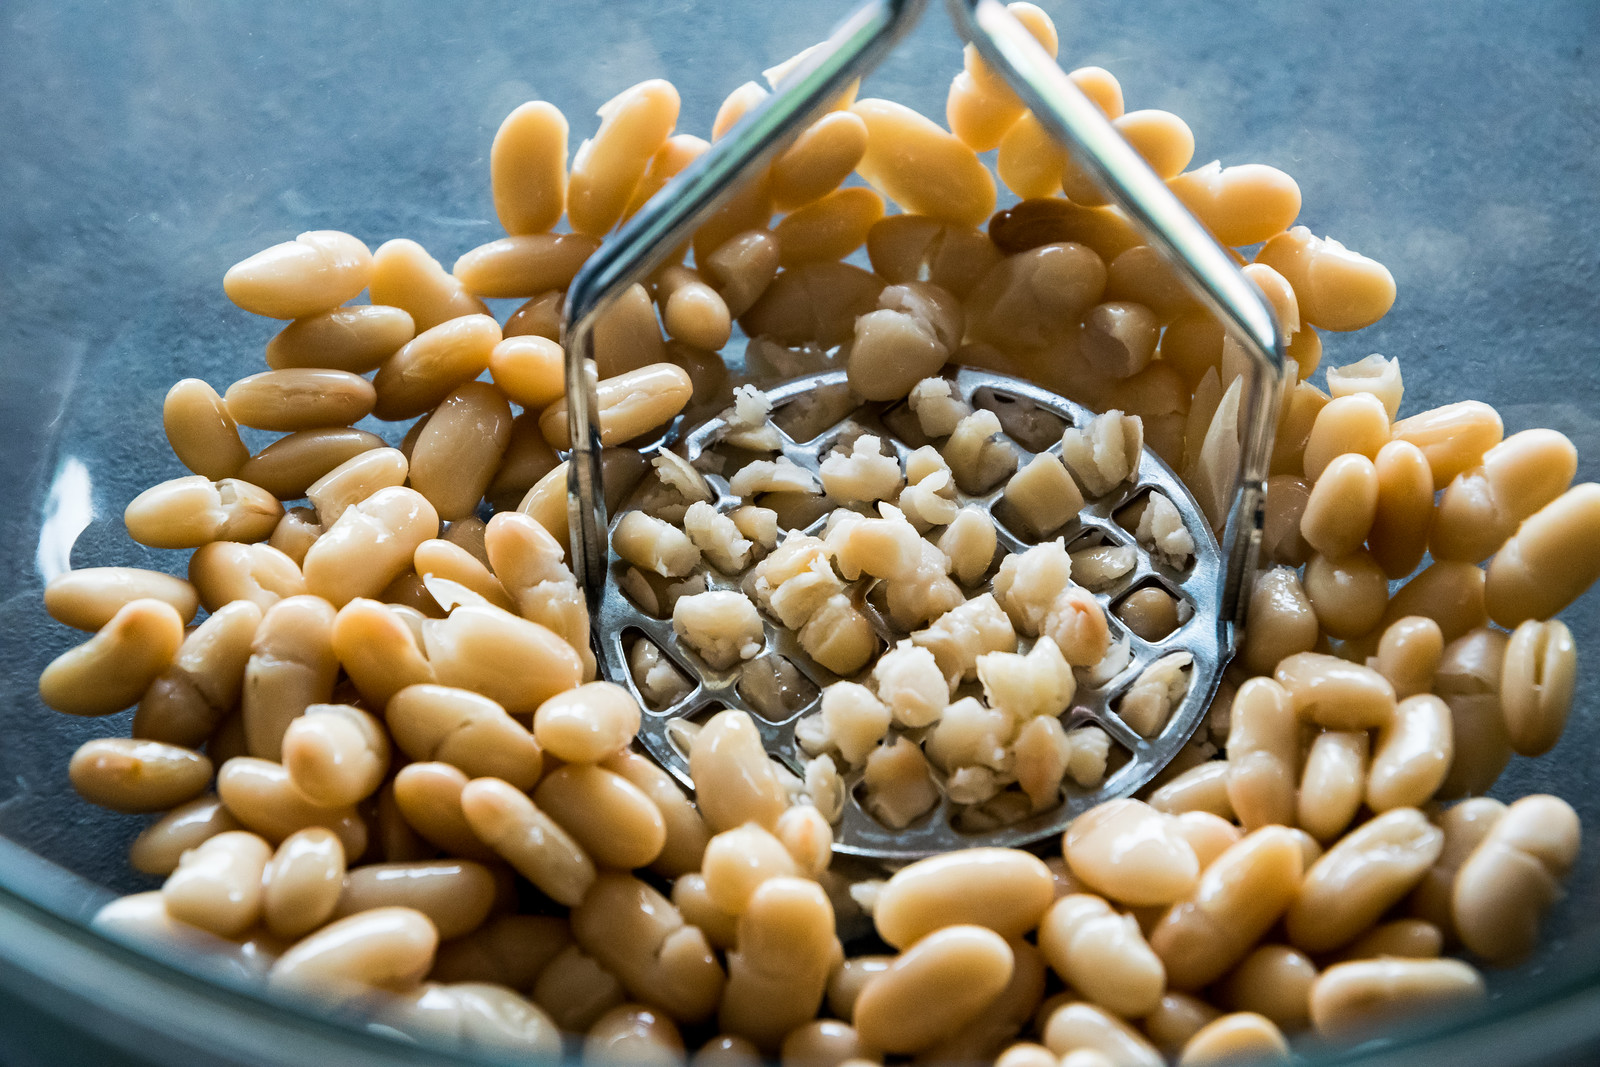 cannellini beans are extra soft and creamy